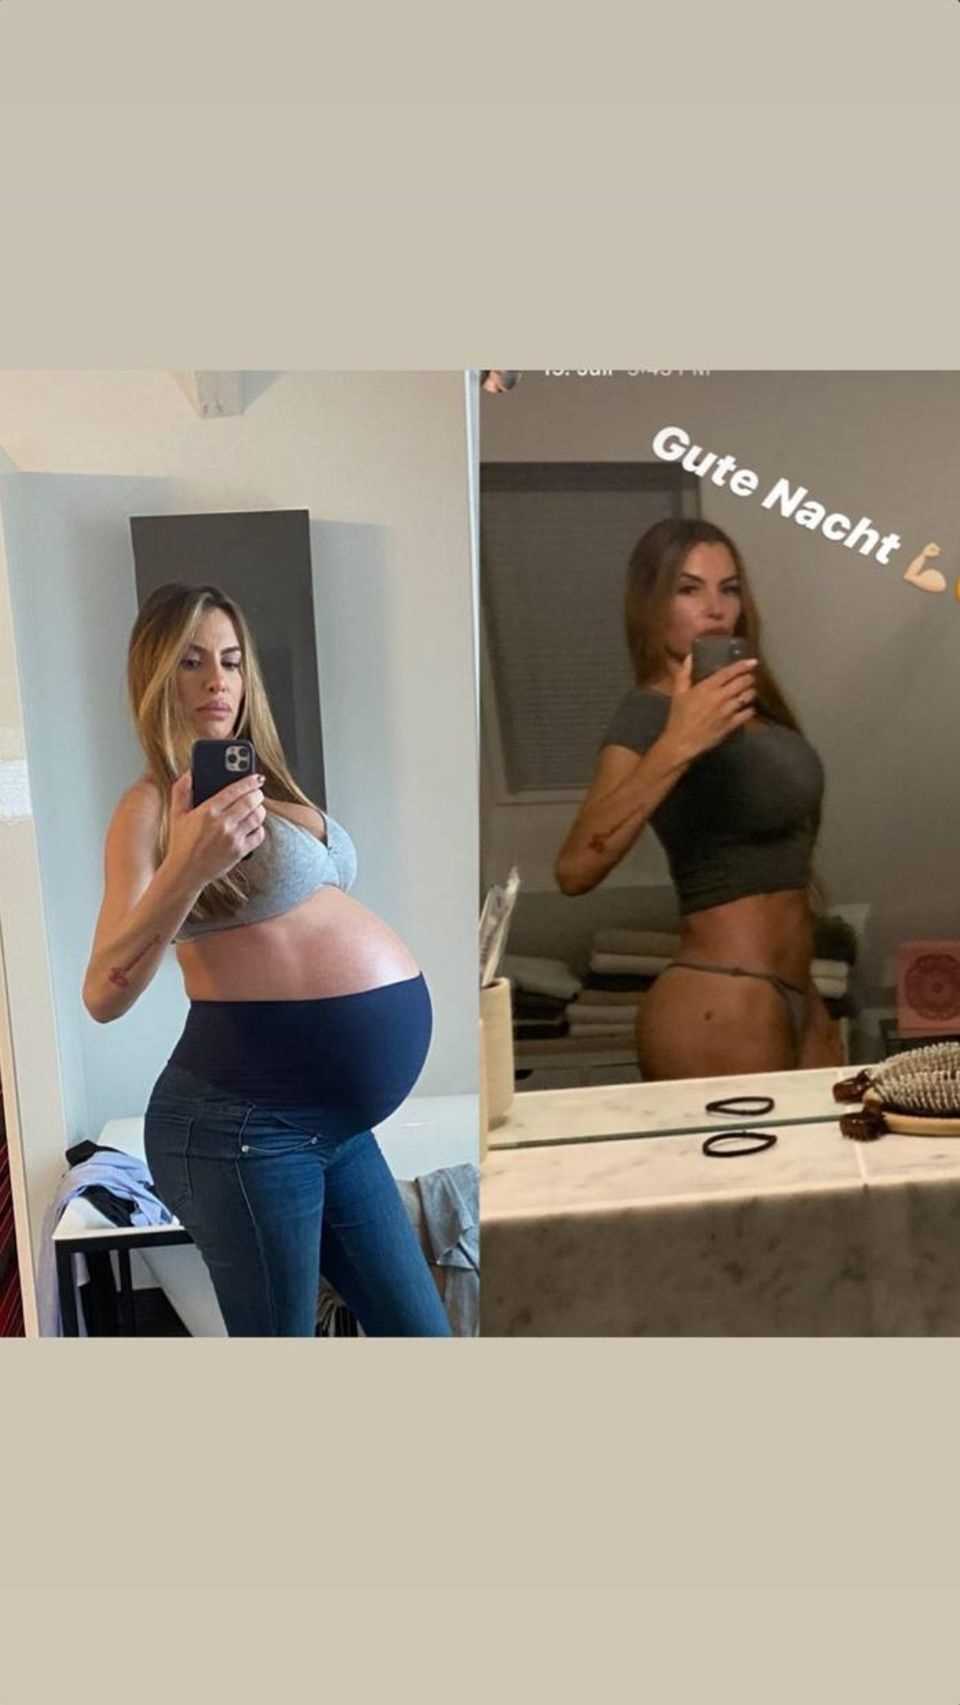 Anna-Maria Ferchichi: She posts an impressive before and after photo